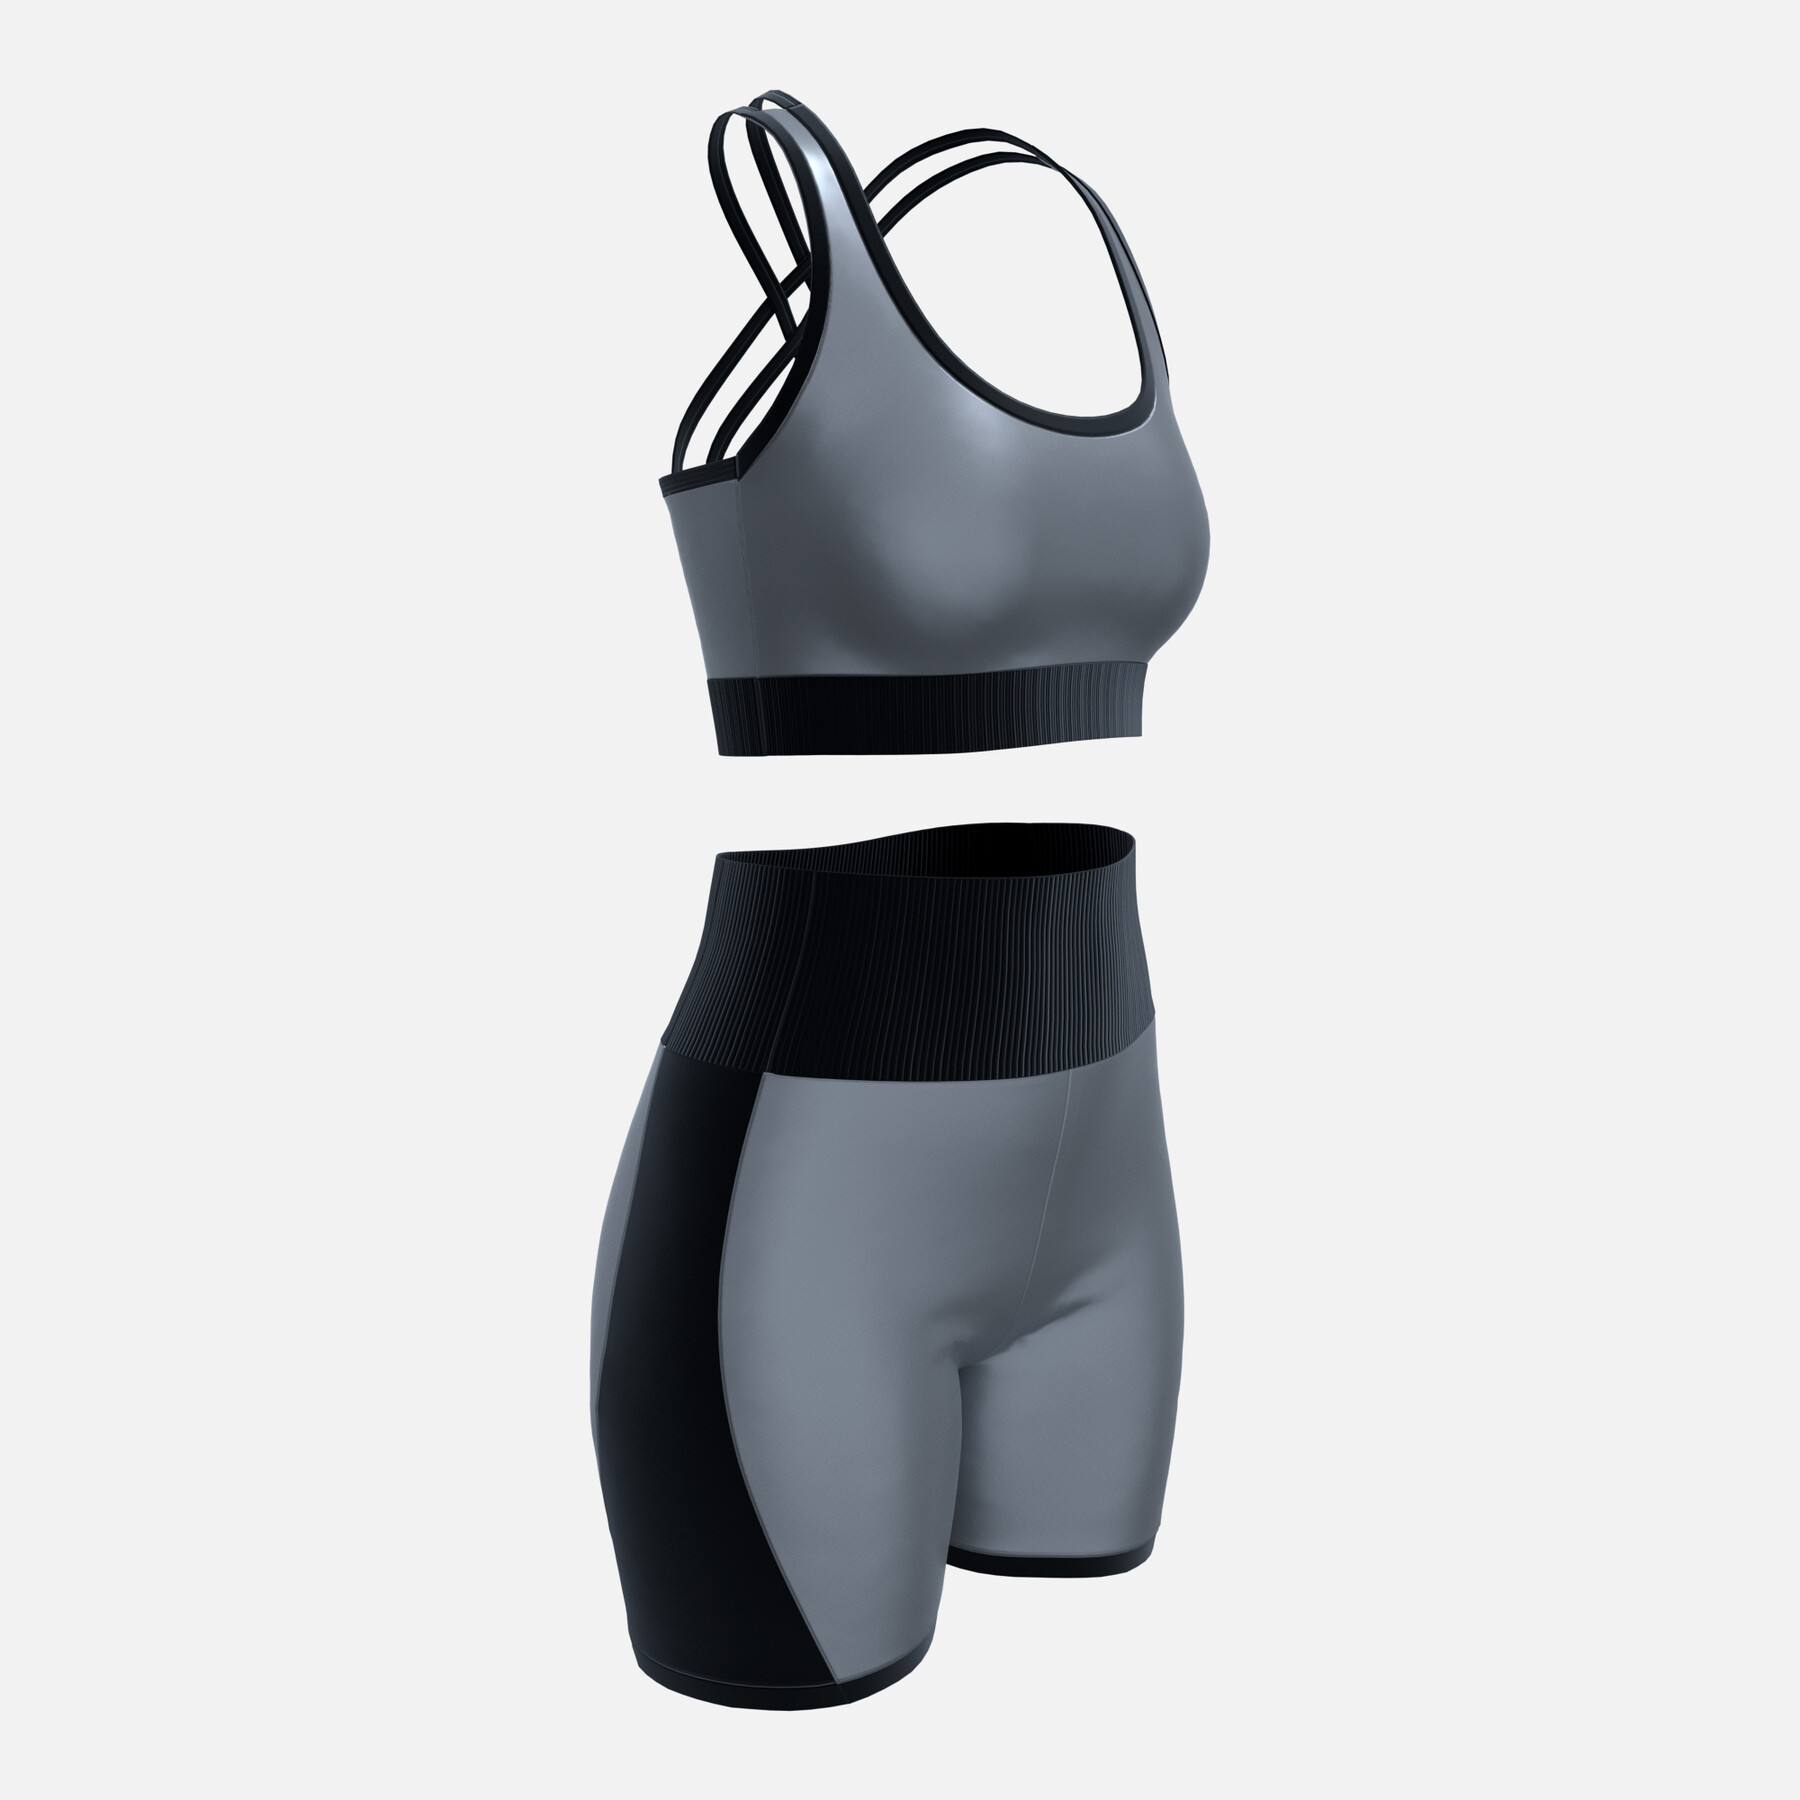 31,223 Sexy Woman Sports Bra Images, Stock Photos, 3D objects, & Vectors